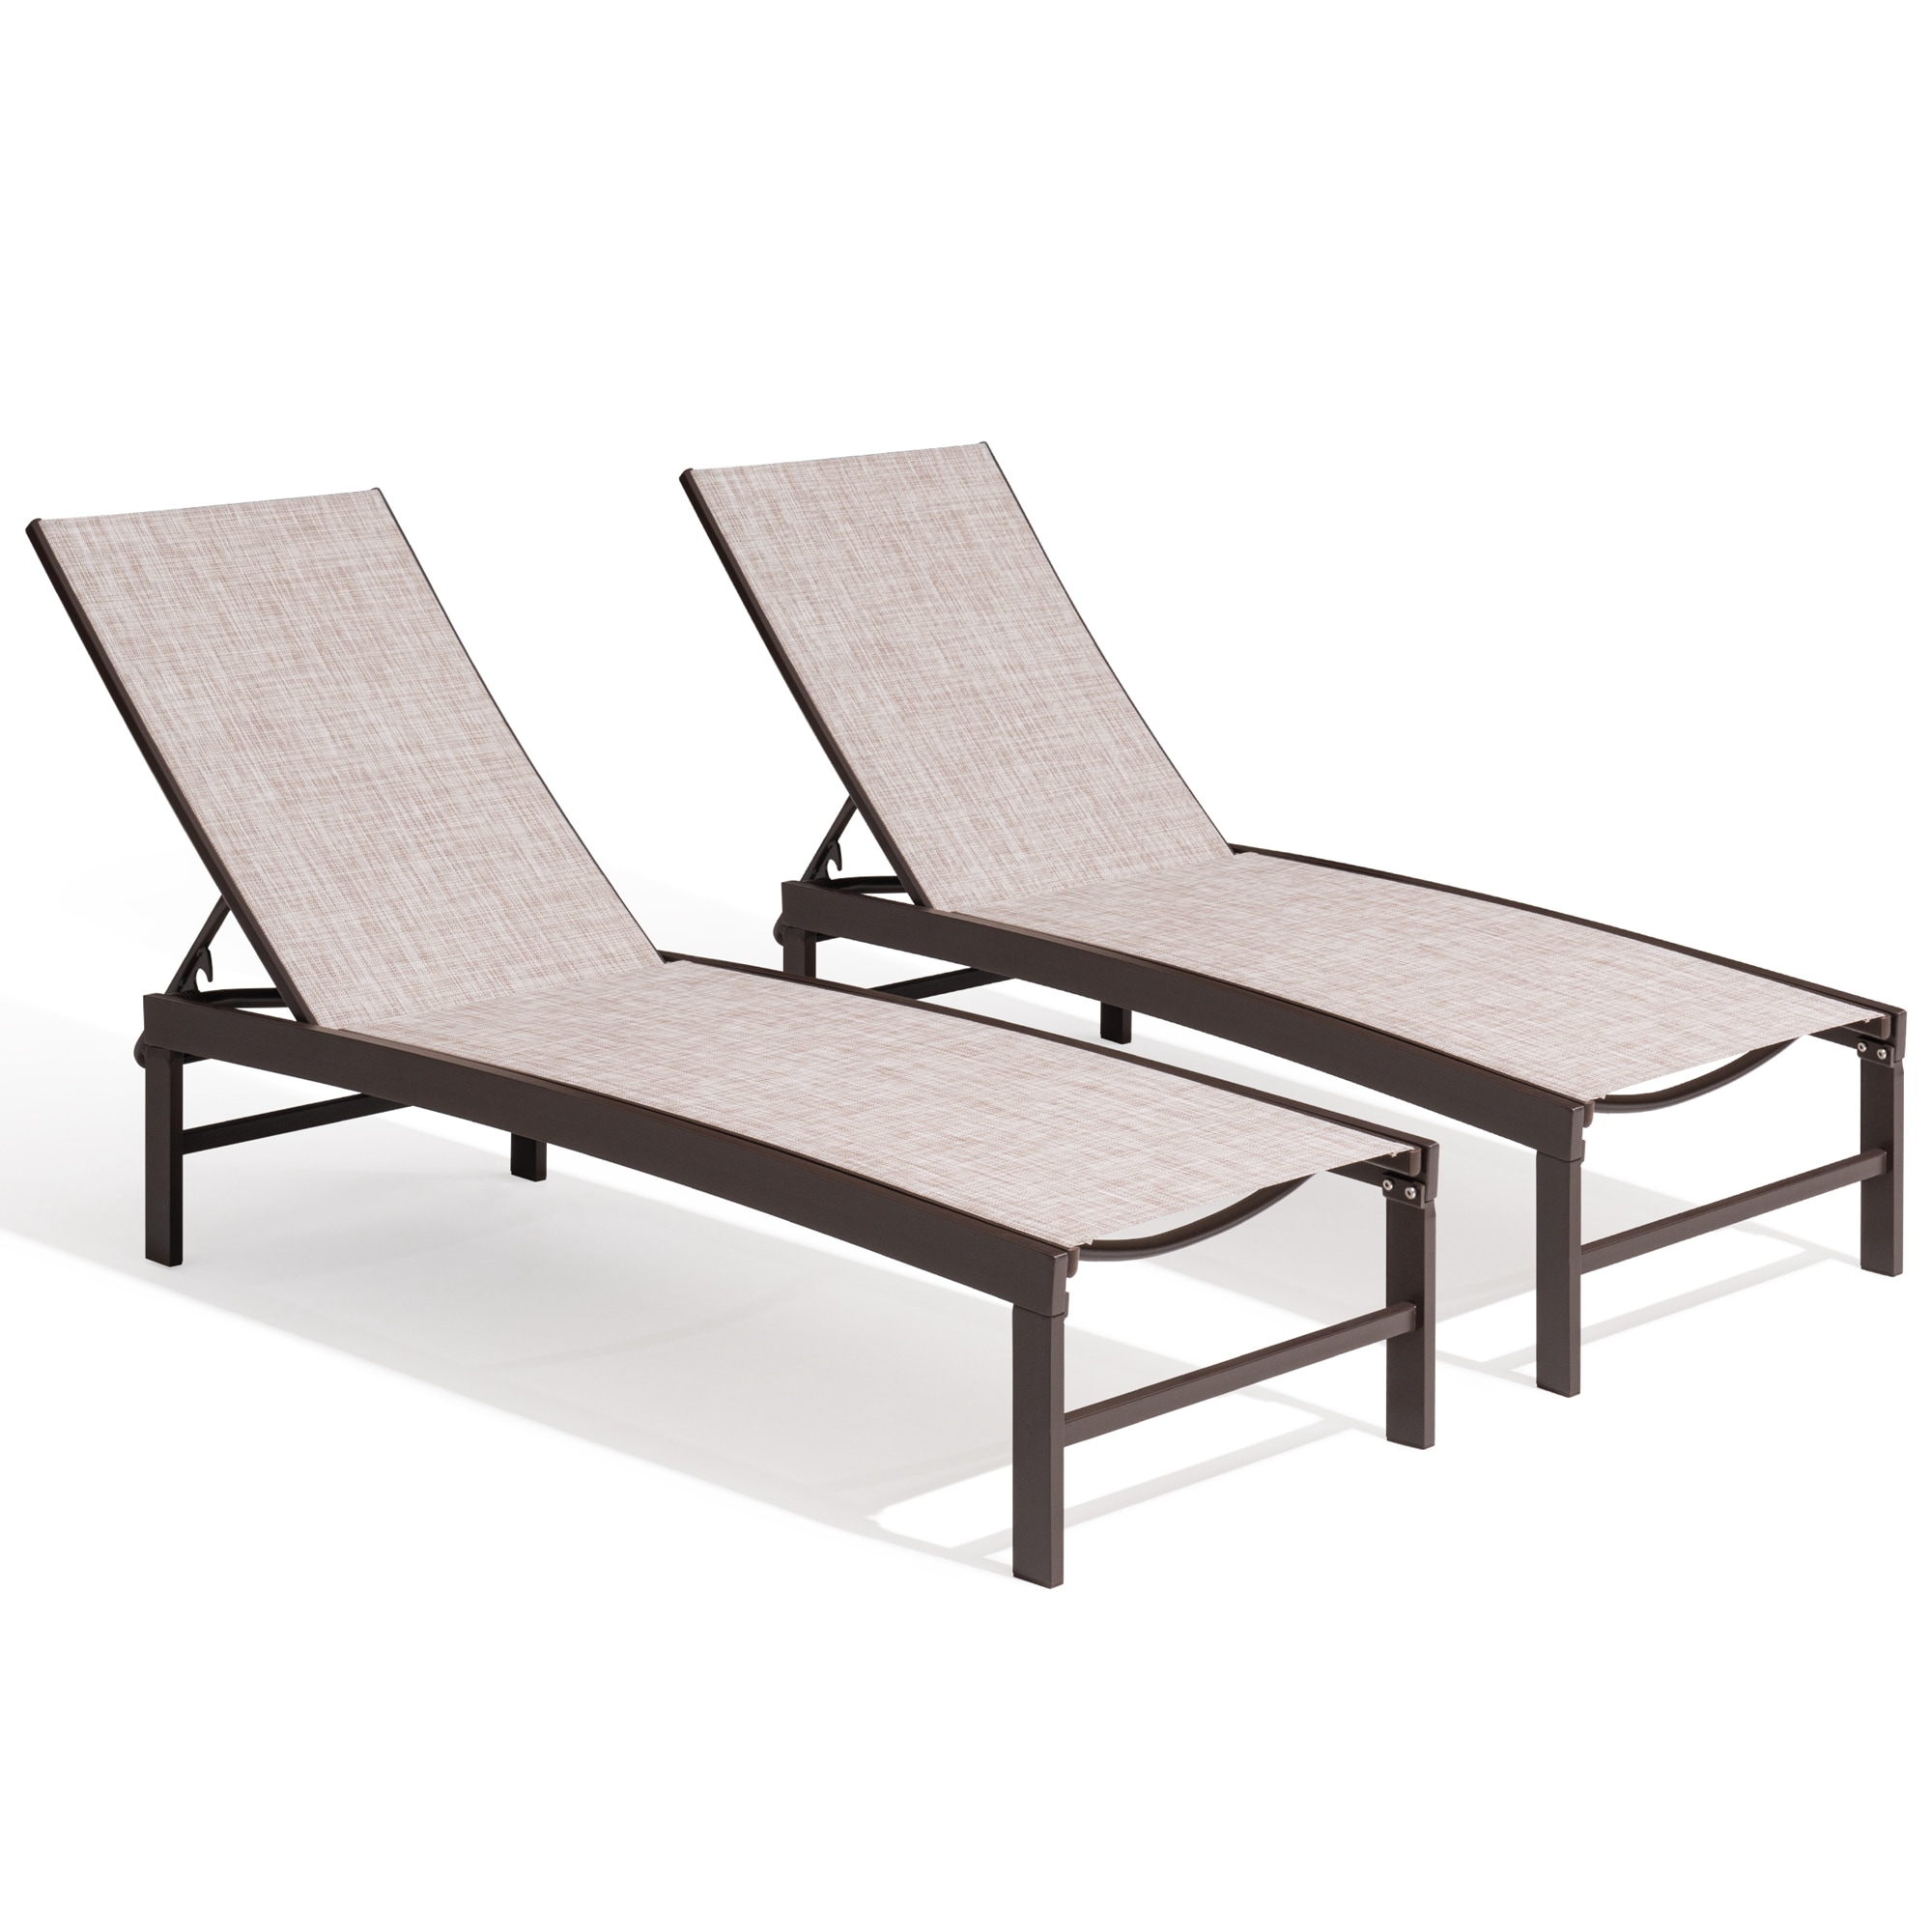 Set of 2 Patio Chaise Lounge, Outdoor Pool Lounge Chair for 2, Layout Chair  Outdoor Furniture Adjustable with 5 Positions | Side Table | Max Weight